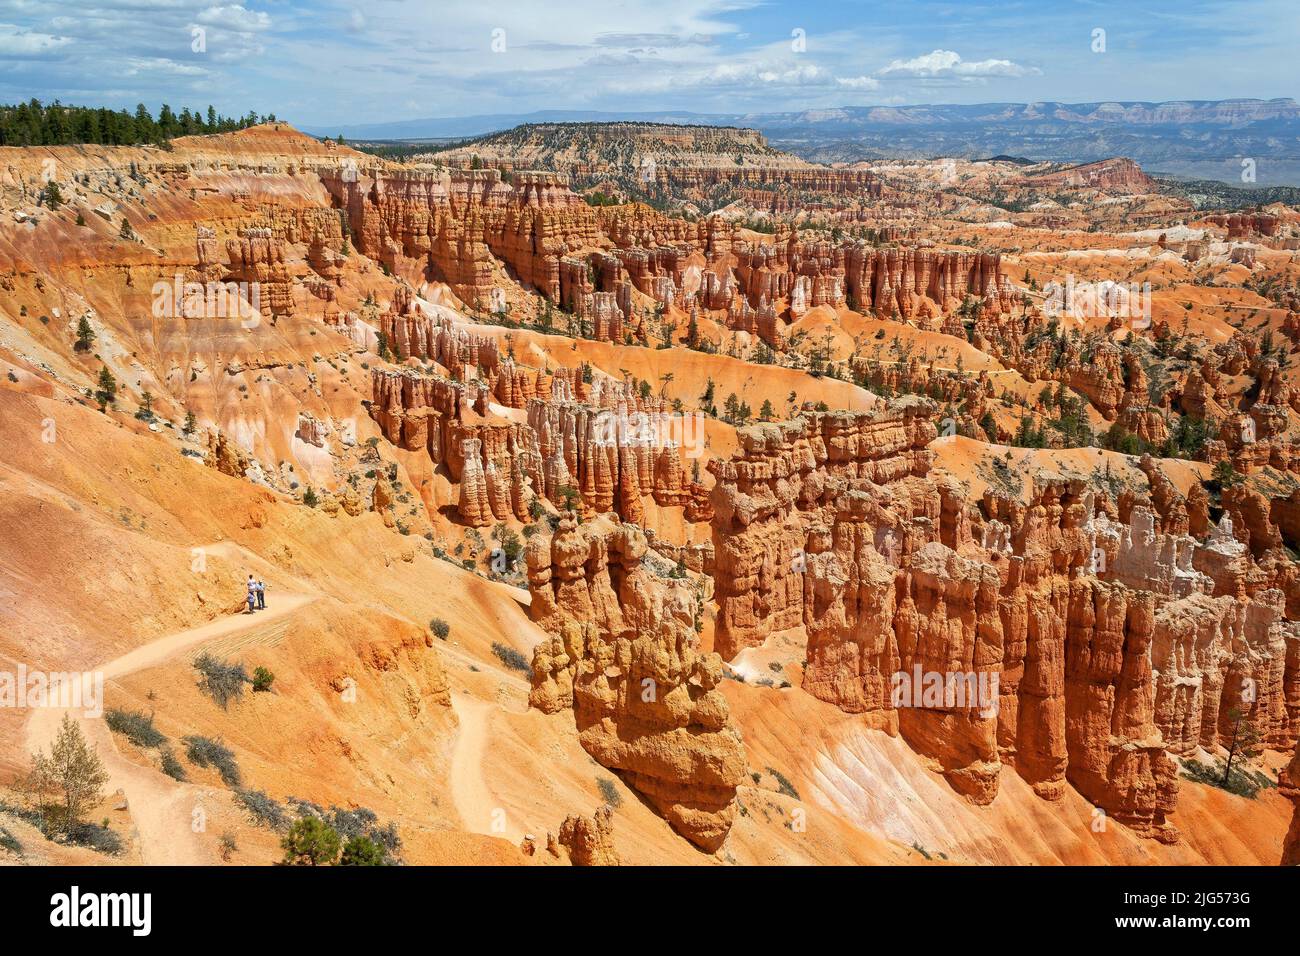 Utah red rock national park brice canyon. Rock formations, hoodoos, desert and forest scenery. Stock Photo